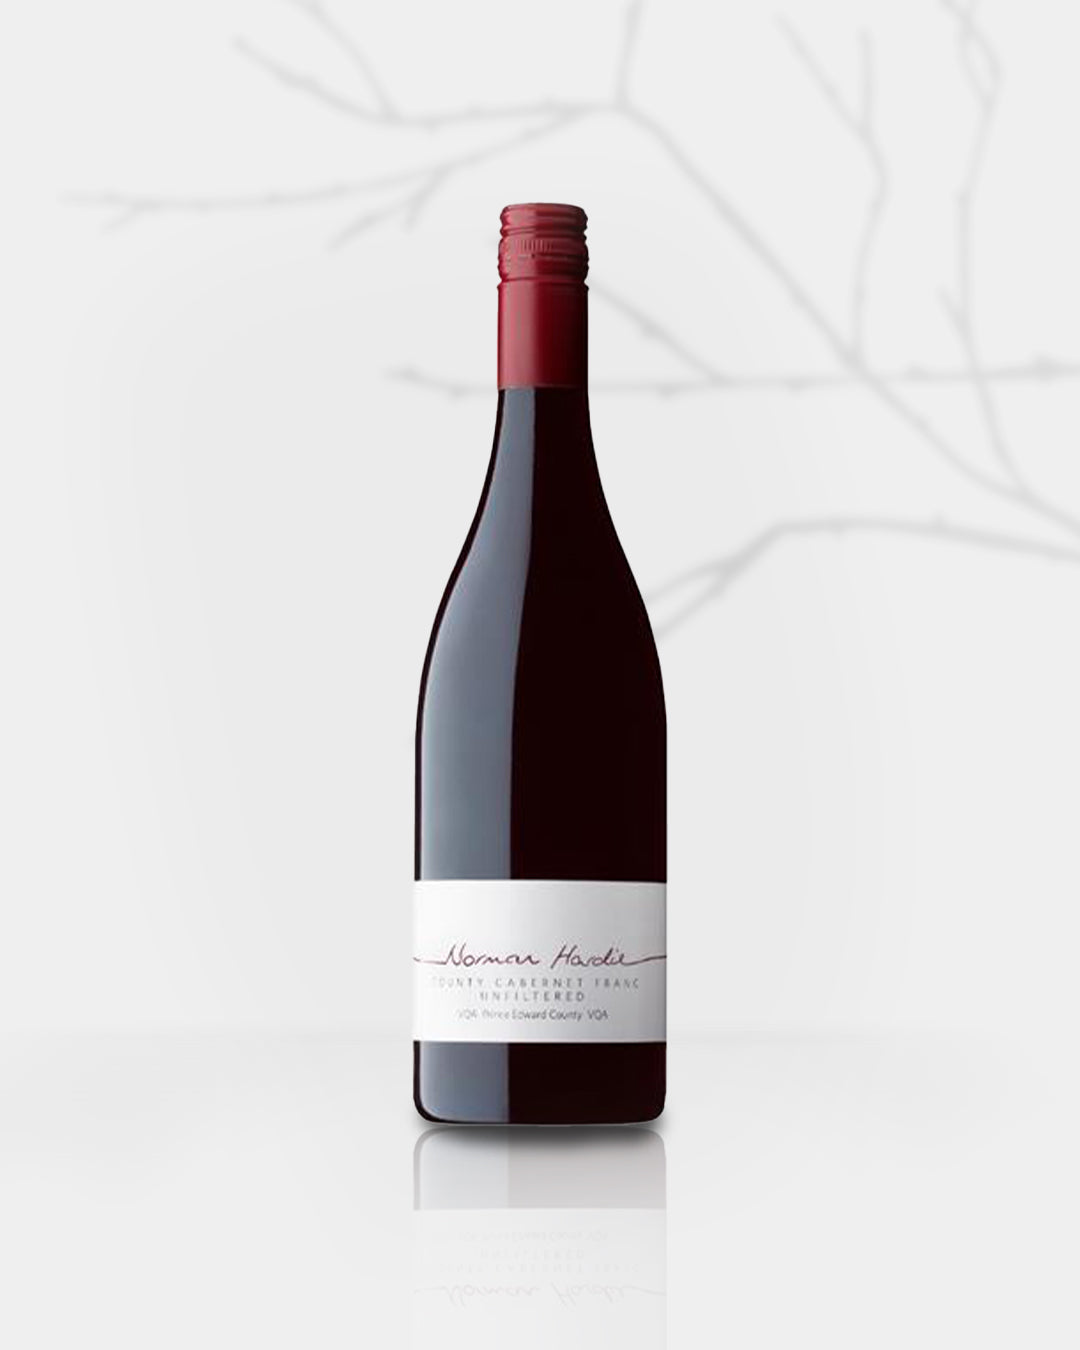 Norman Hardie Winery Cabernet Franc Unfiltered 2017